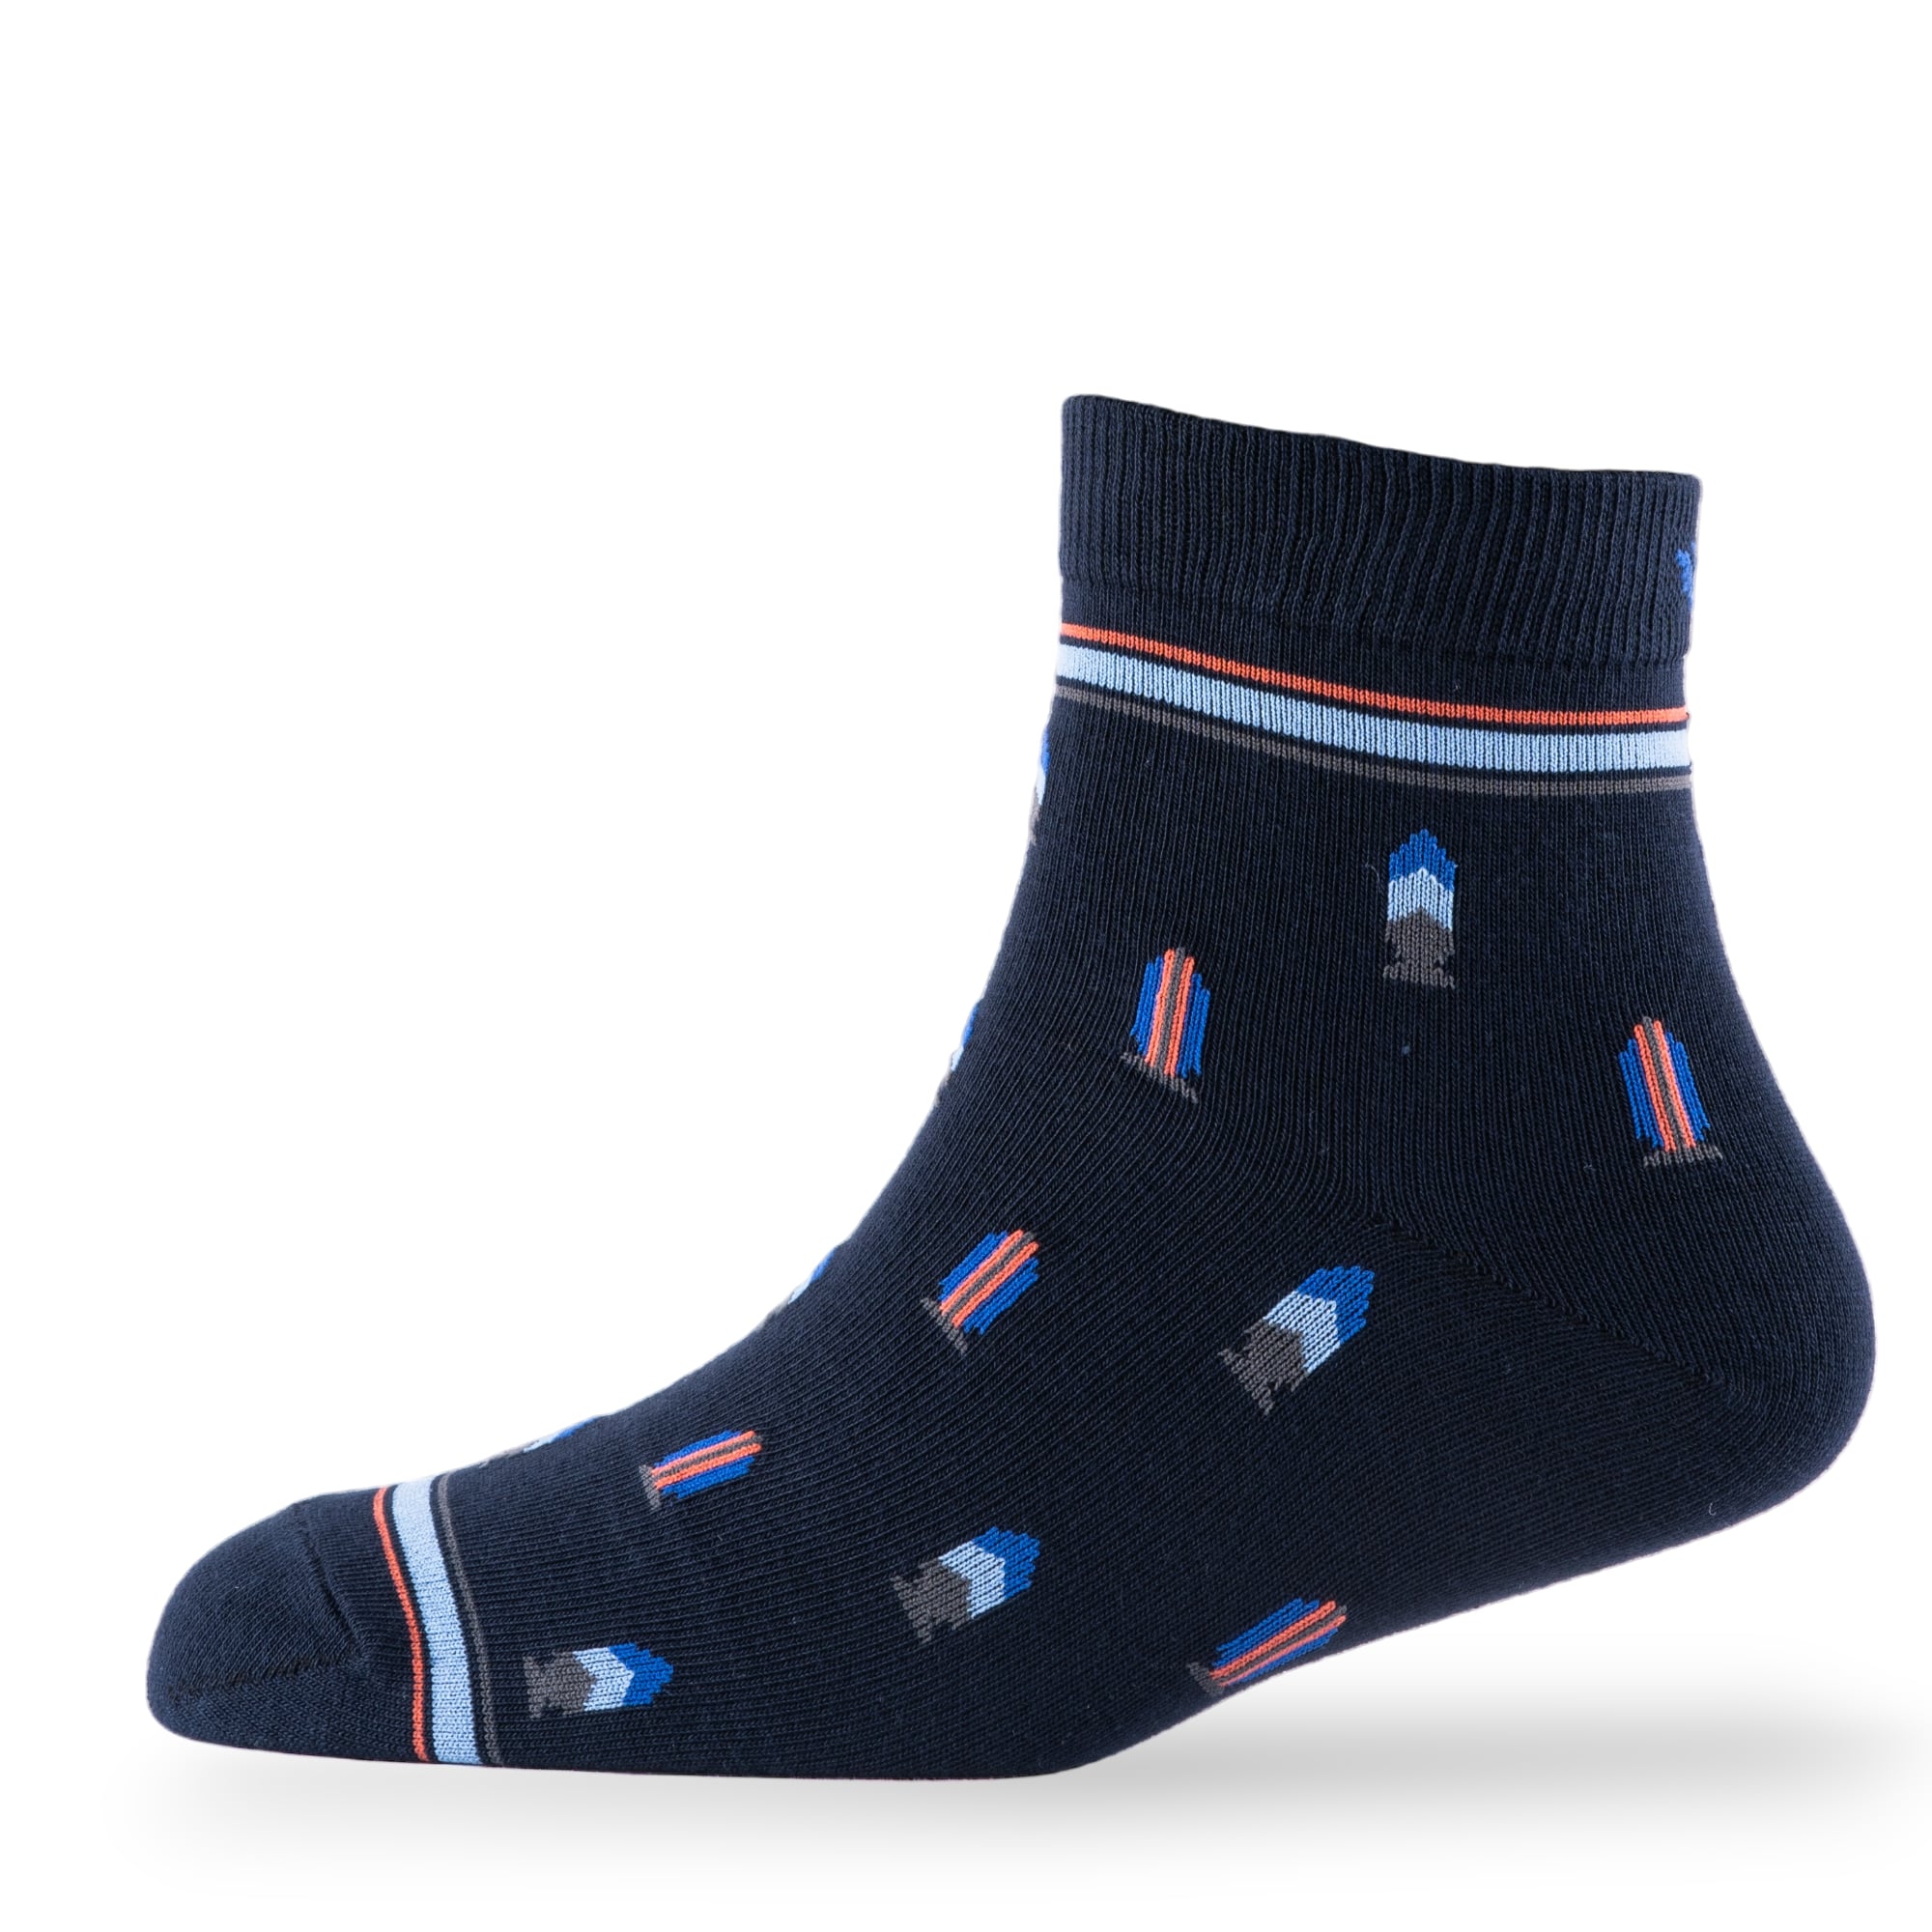 Young Wings Men's Multi Colour Cotton Fabric Design Ankle Length Socks - Pack of 5, Style no. 2736-M1